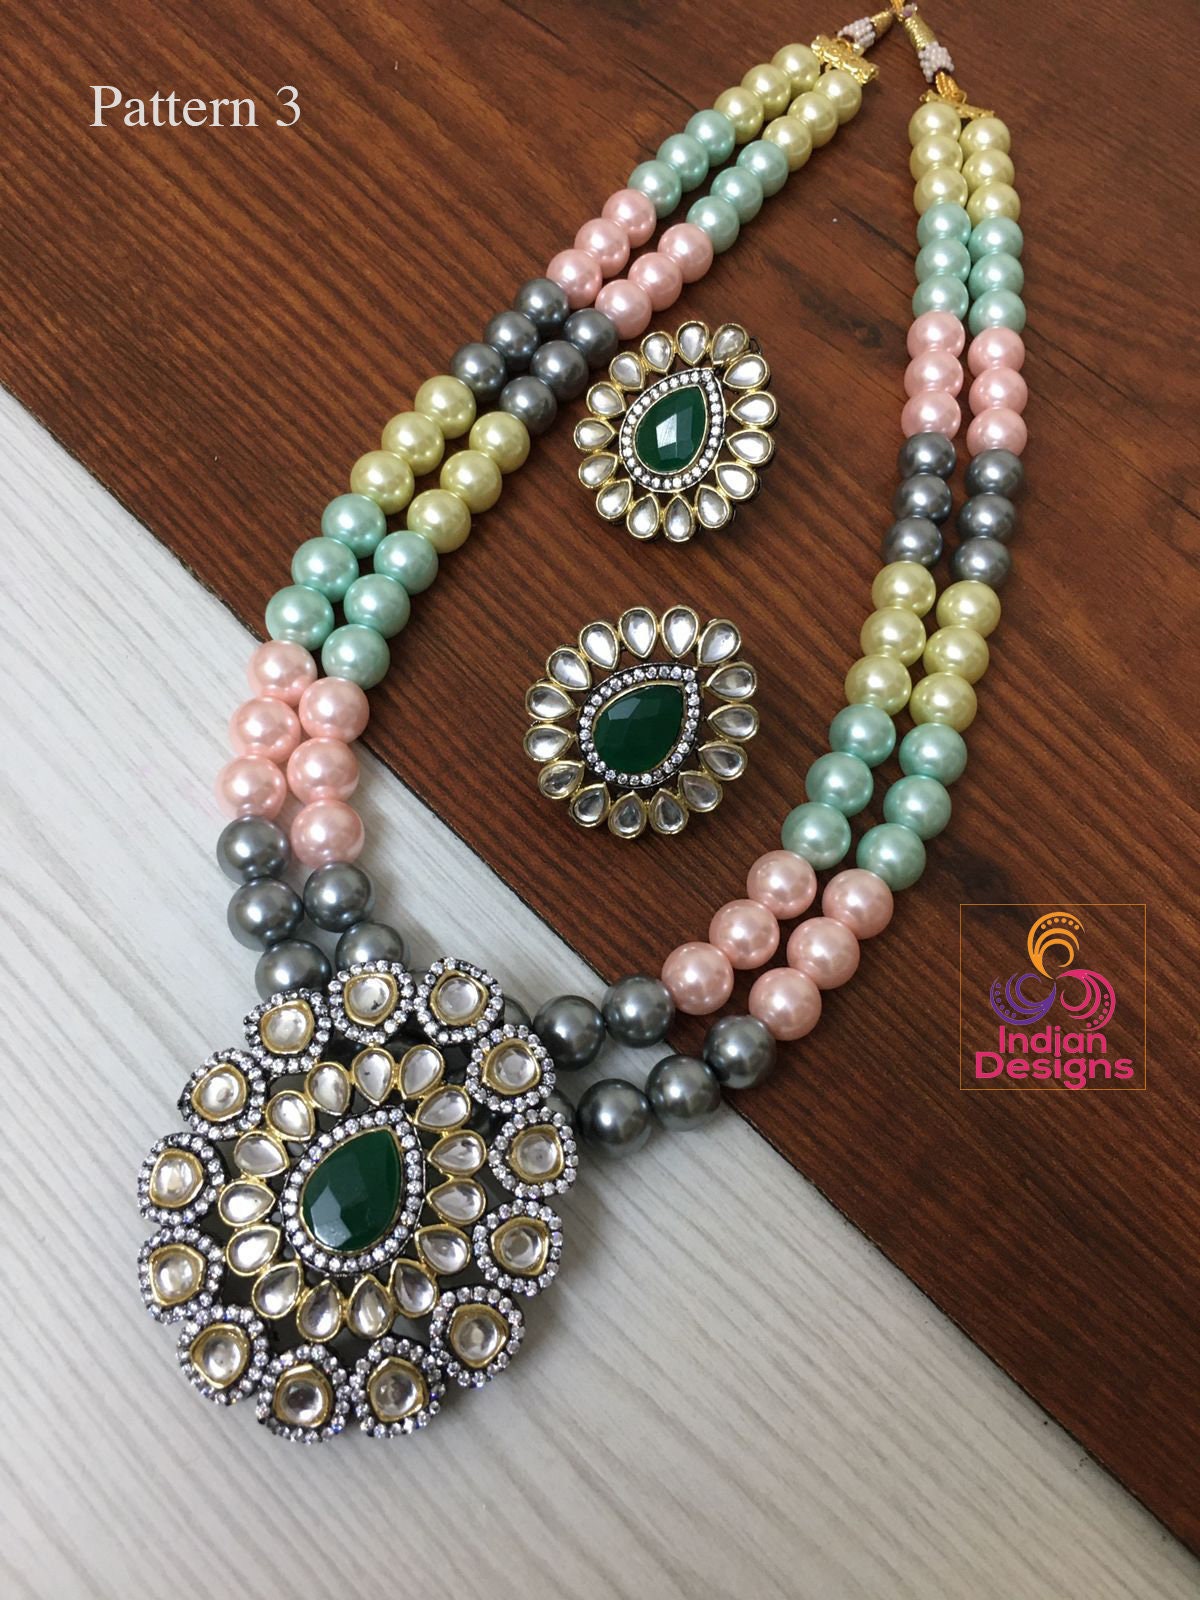 FREE beading pattern for Pearl Petals necklace | Beaded jewelry, Seed bead  jewelry, Beaded bracelet patterns